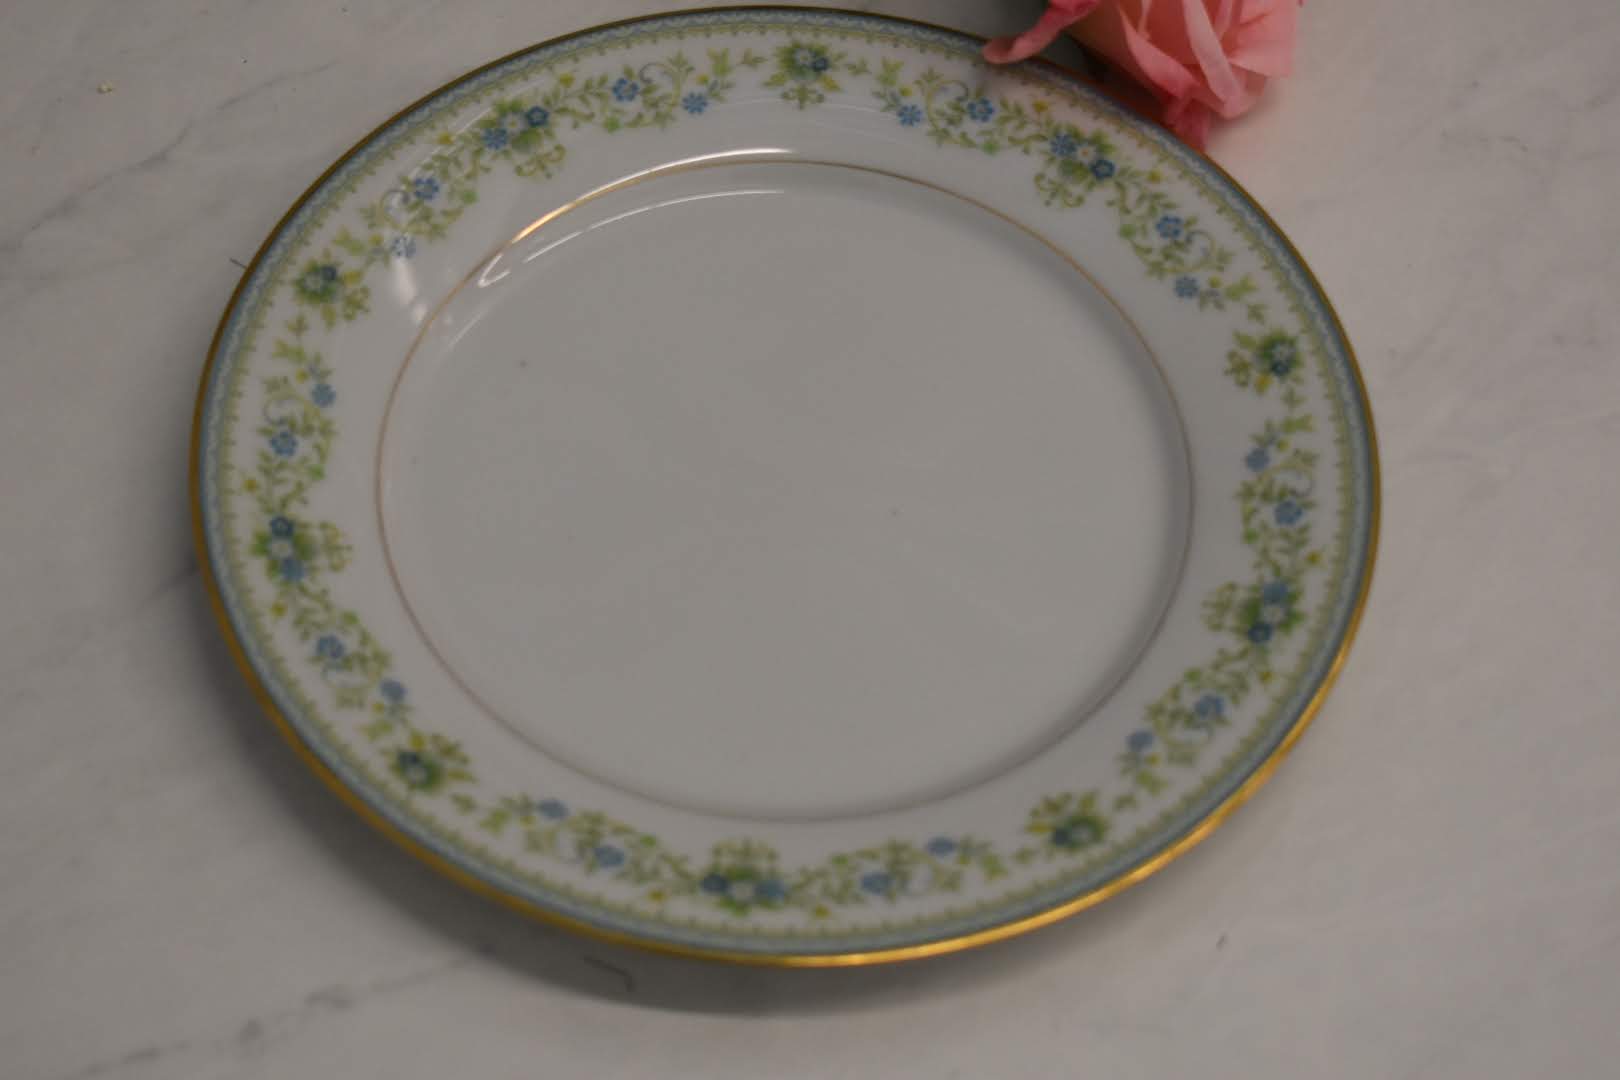 Noritake Contemporary Spring Meadow - Fine Porcelain China - Dinner Plate - Small Platter